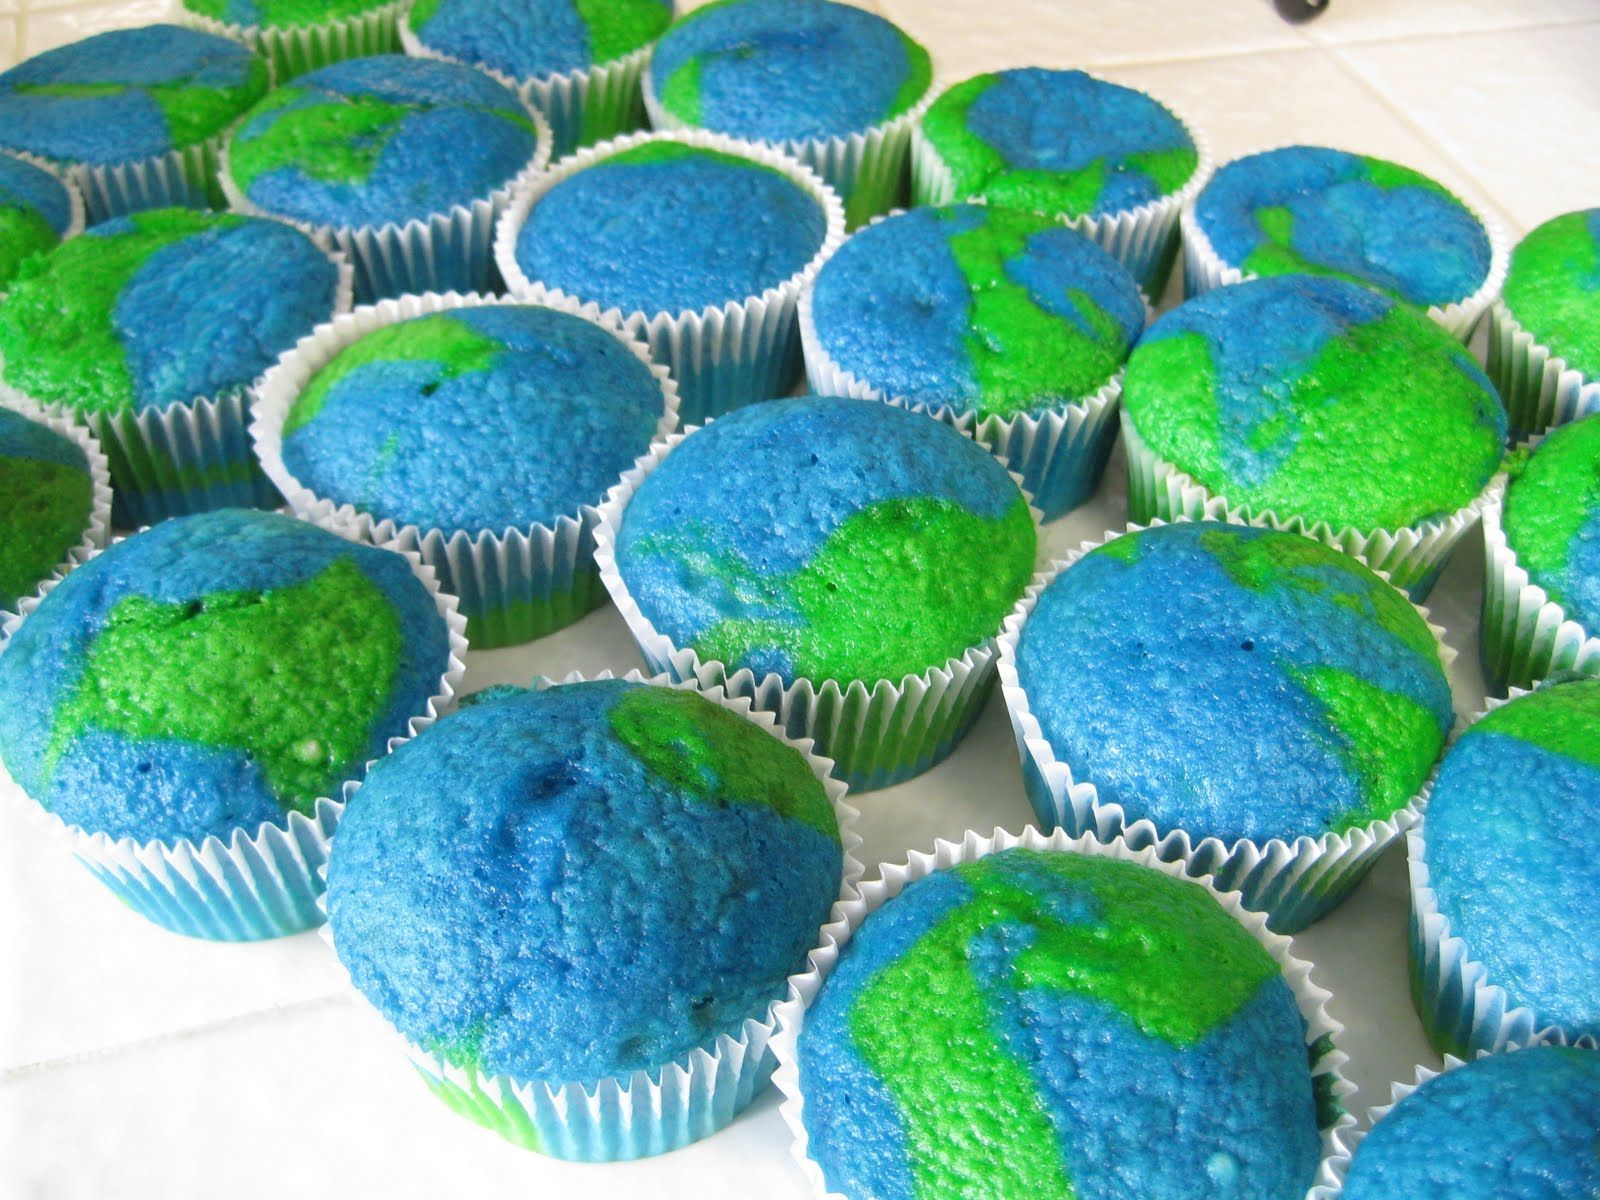 What a yummy treat for Earth Day!